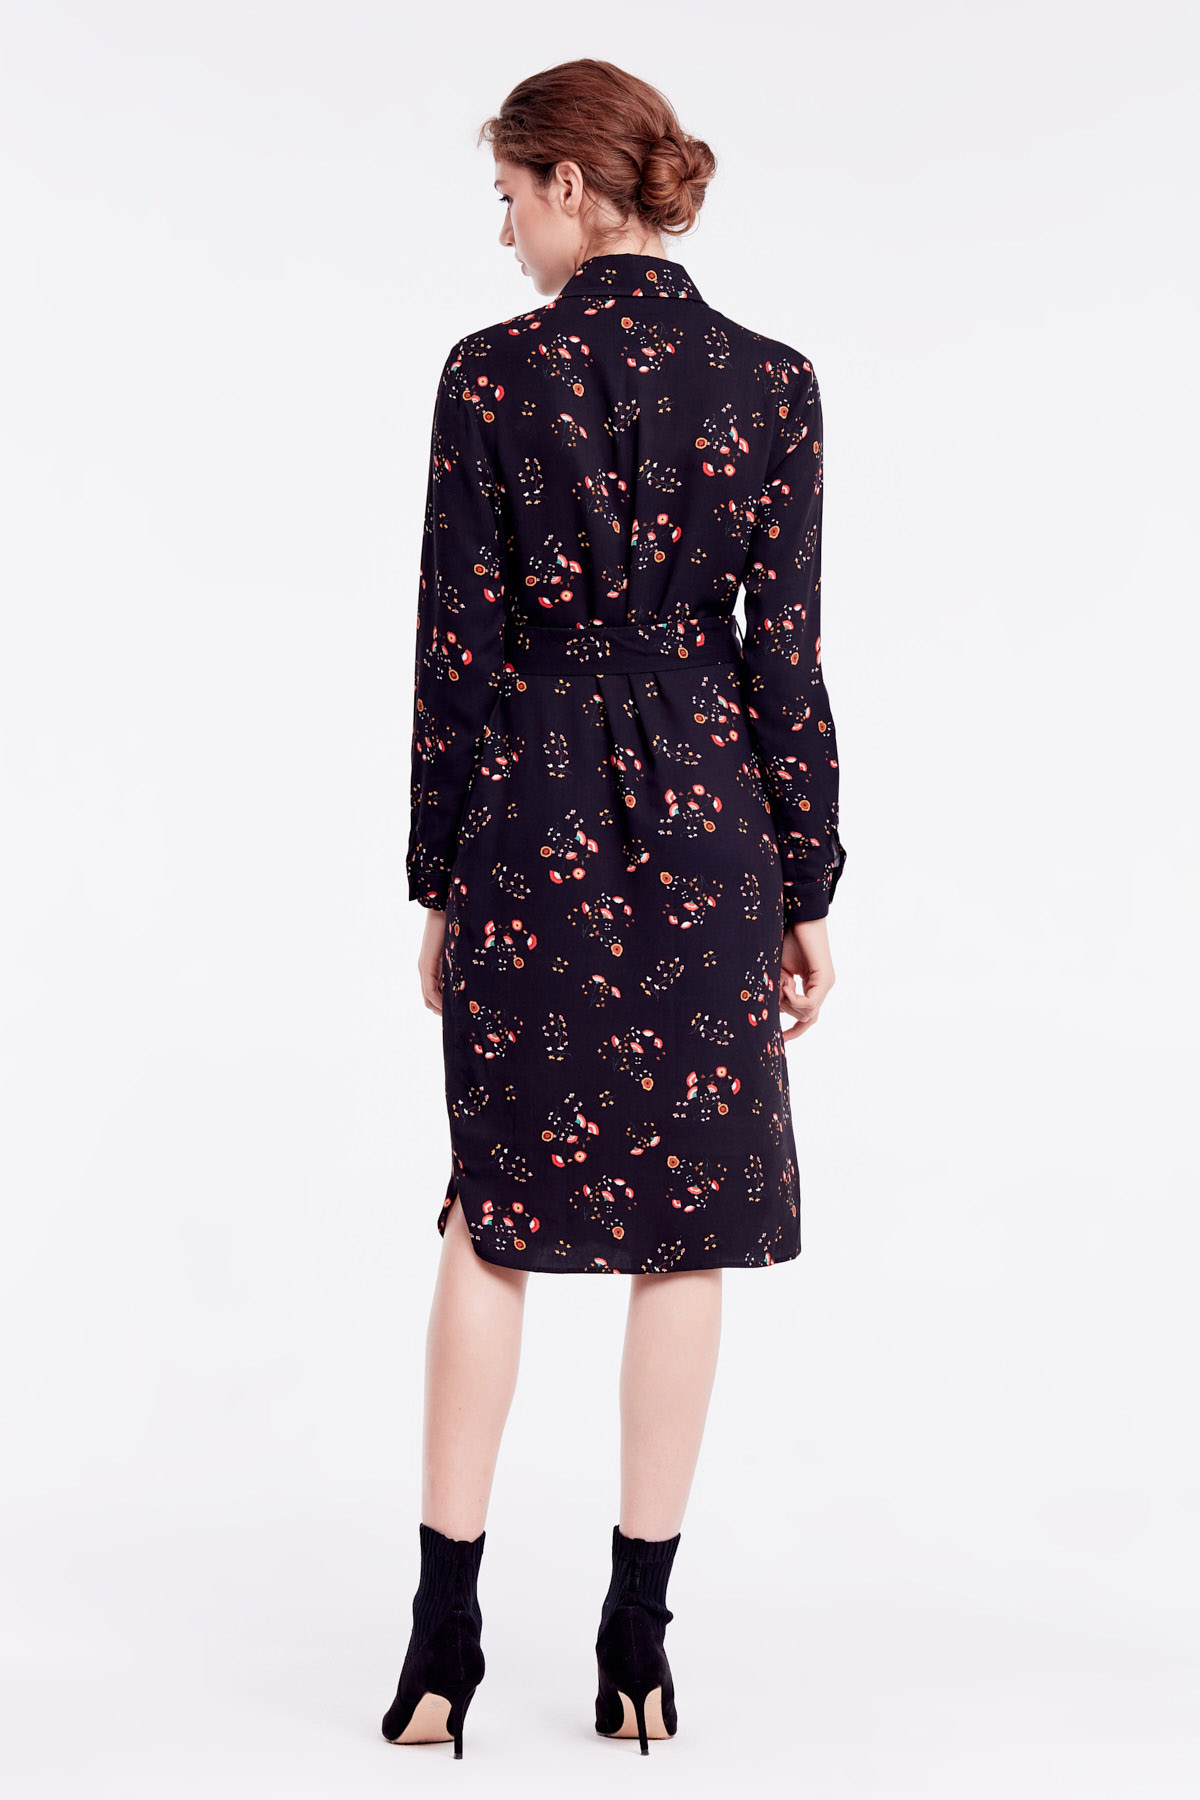 Black floral dress with a concealed placket, photo 6